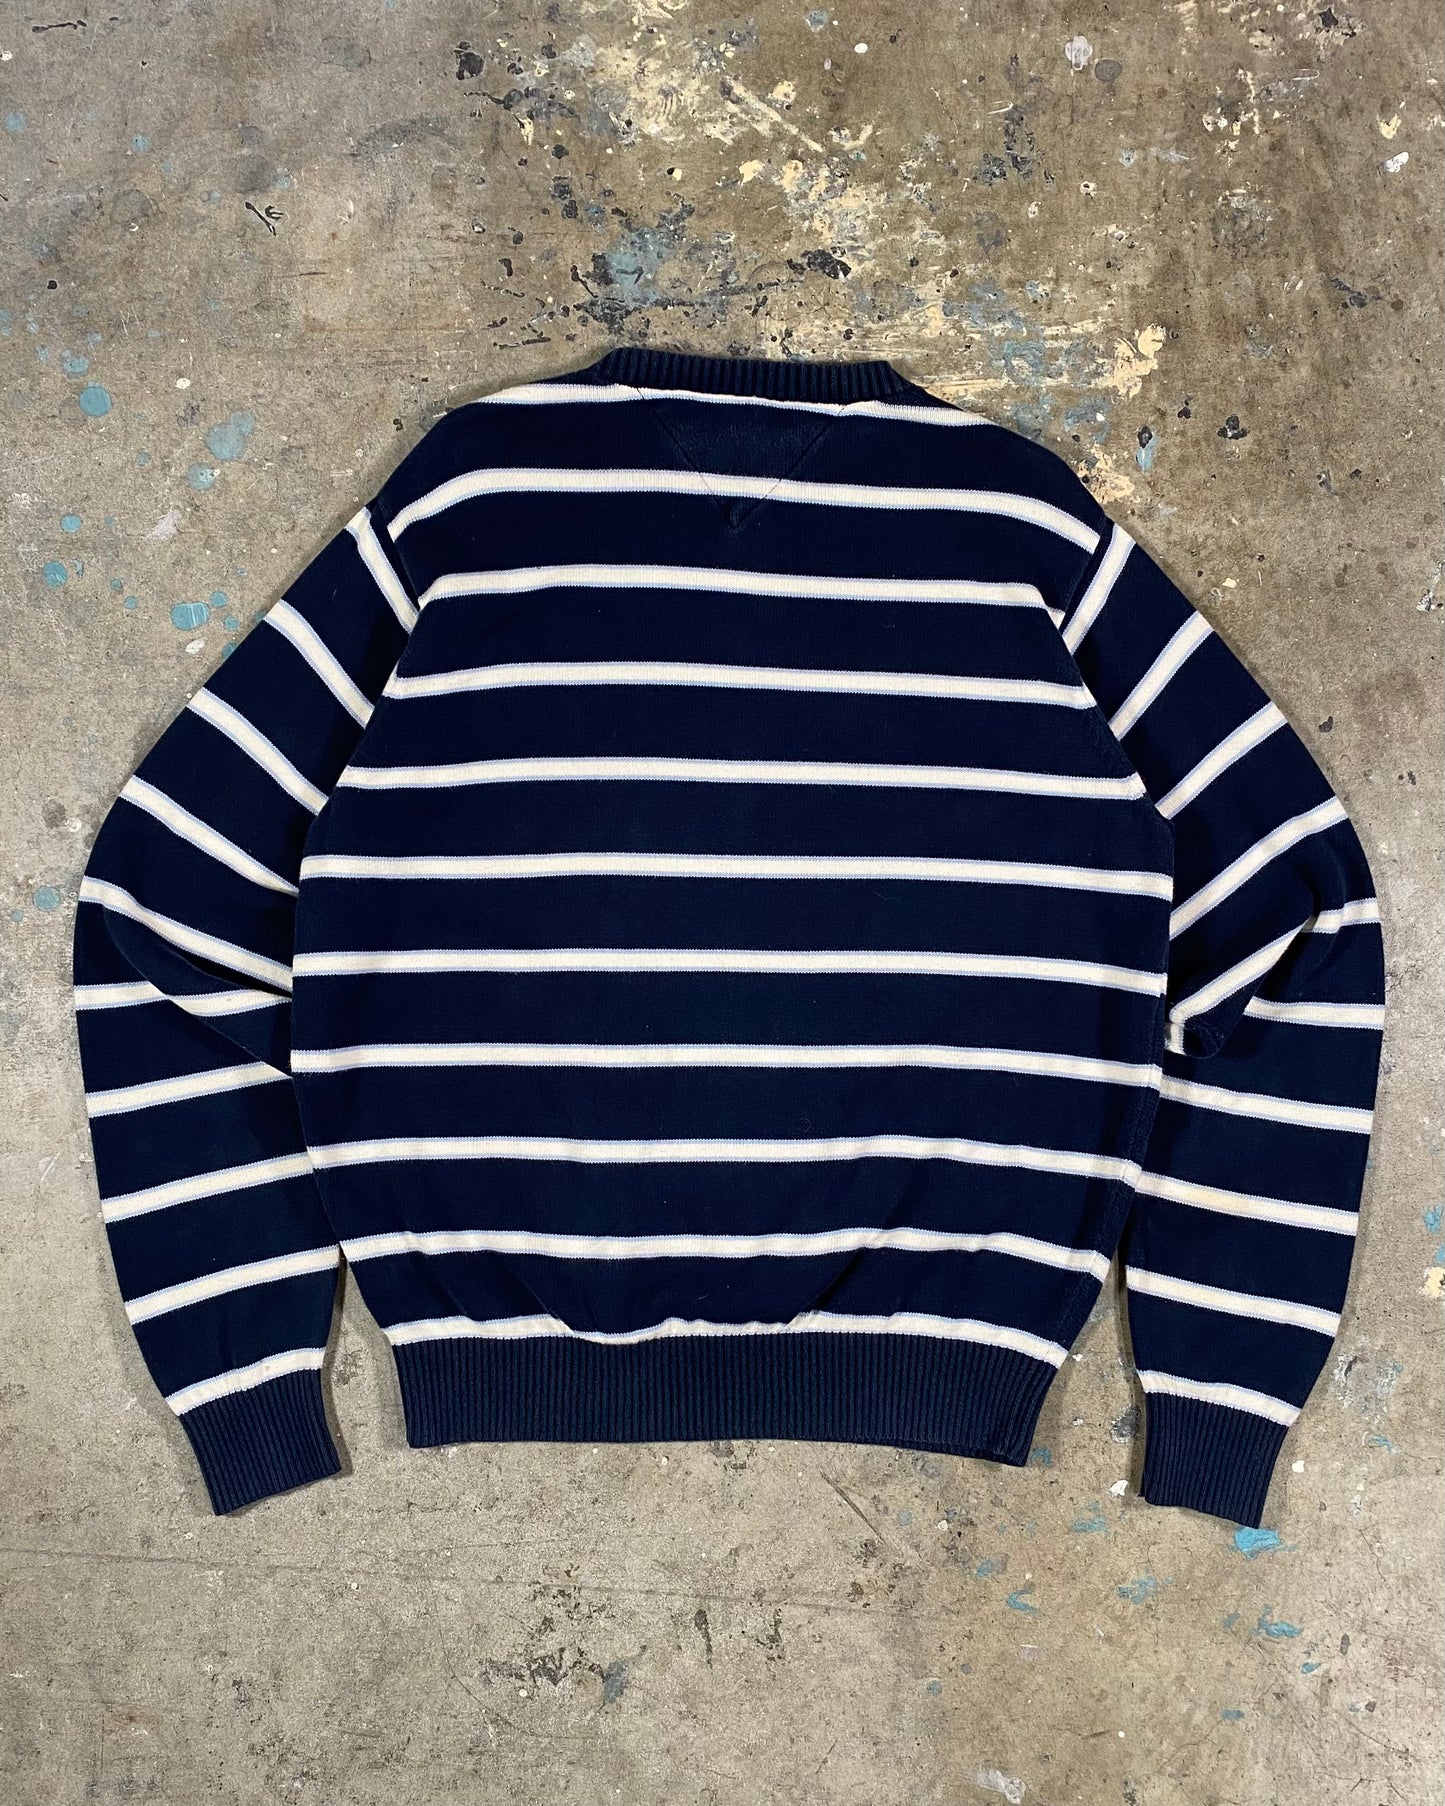 90s Classic Tommy Hilfiger Sweater (M)